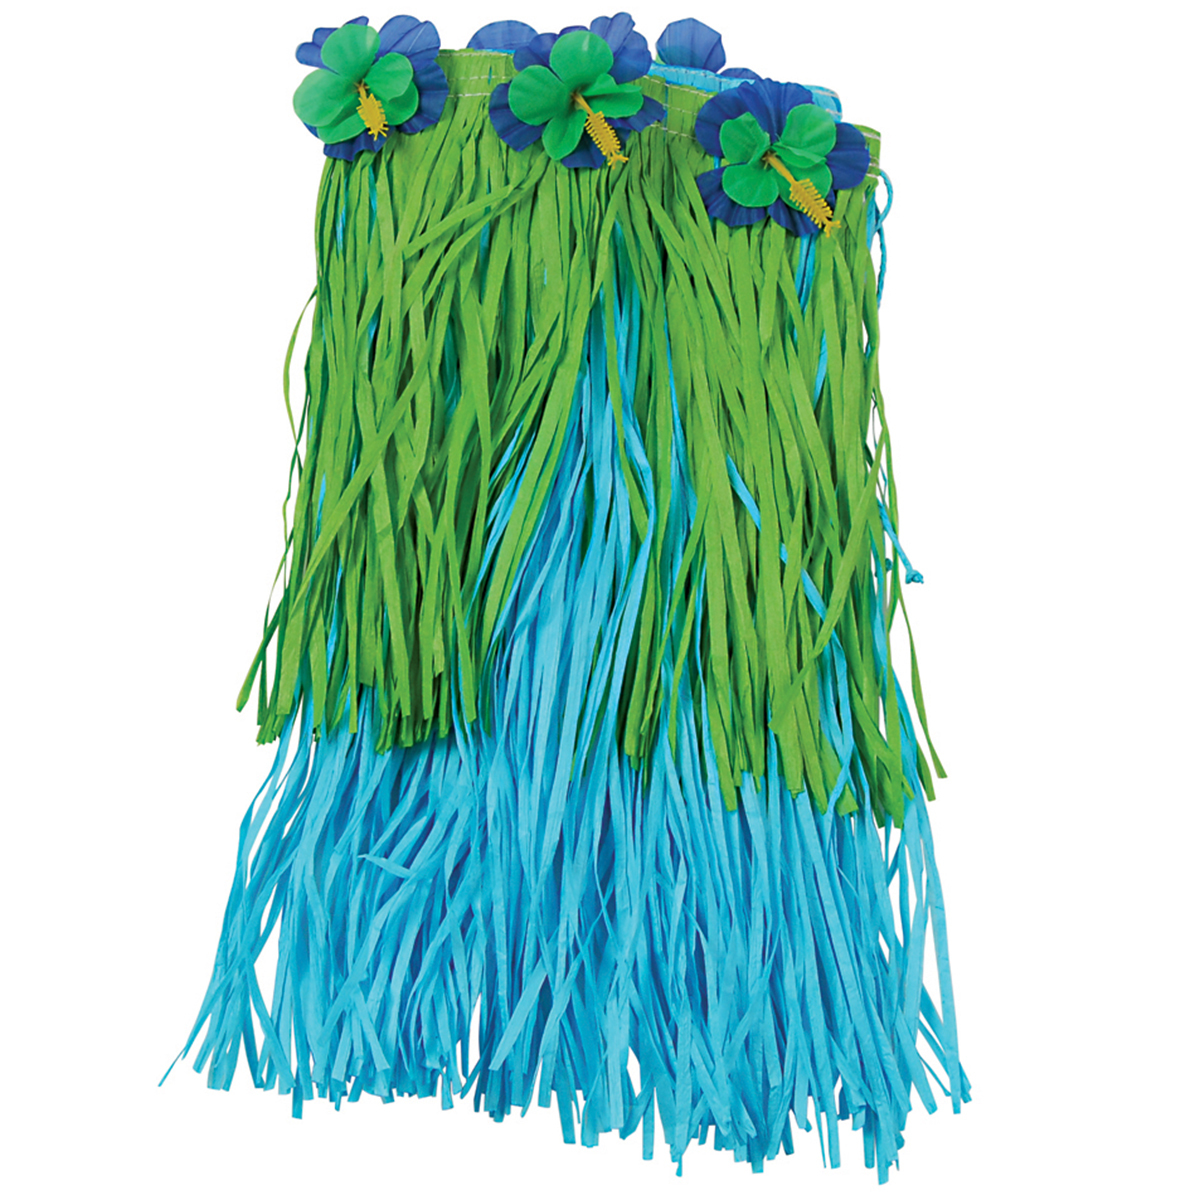 Wholesale Blue & Green Hula Skirt With Flowers - Child Size(18x.55)